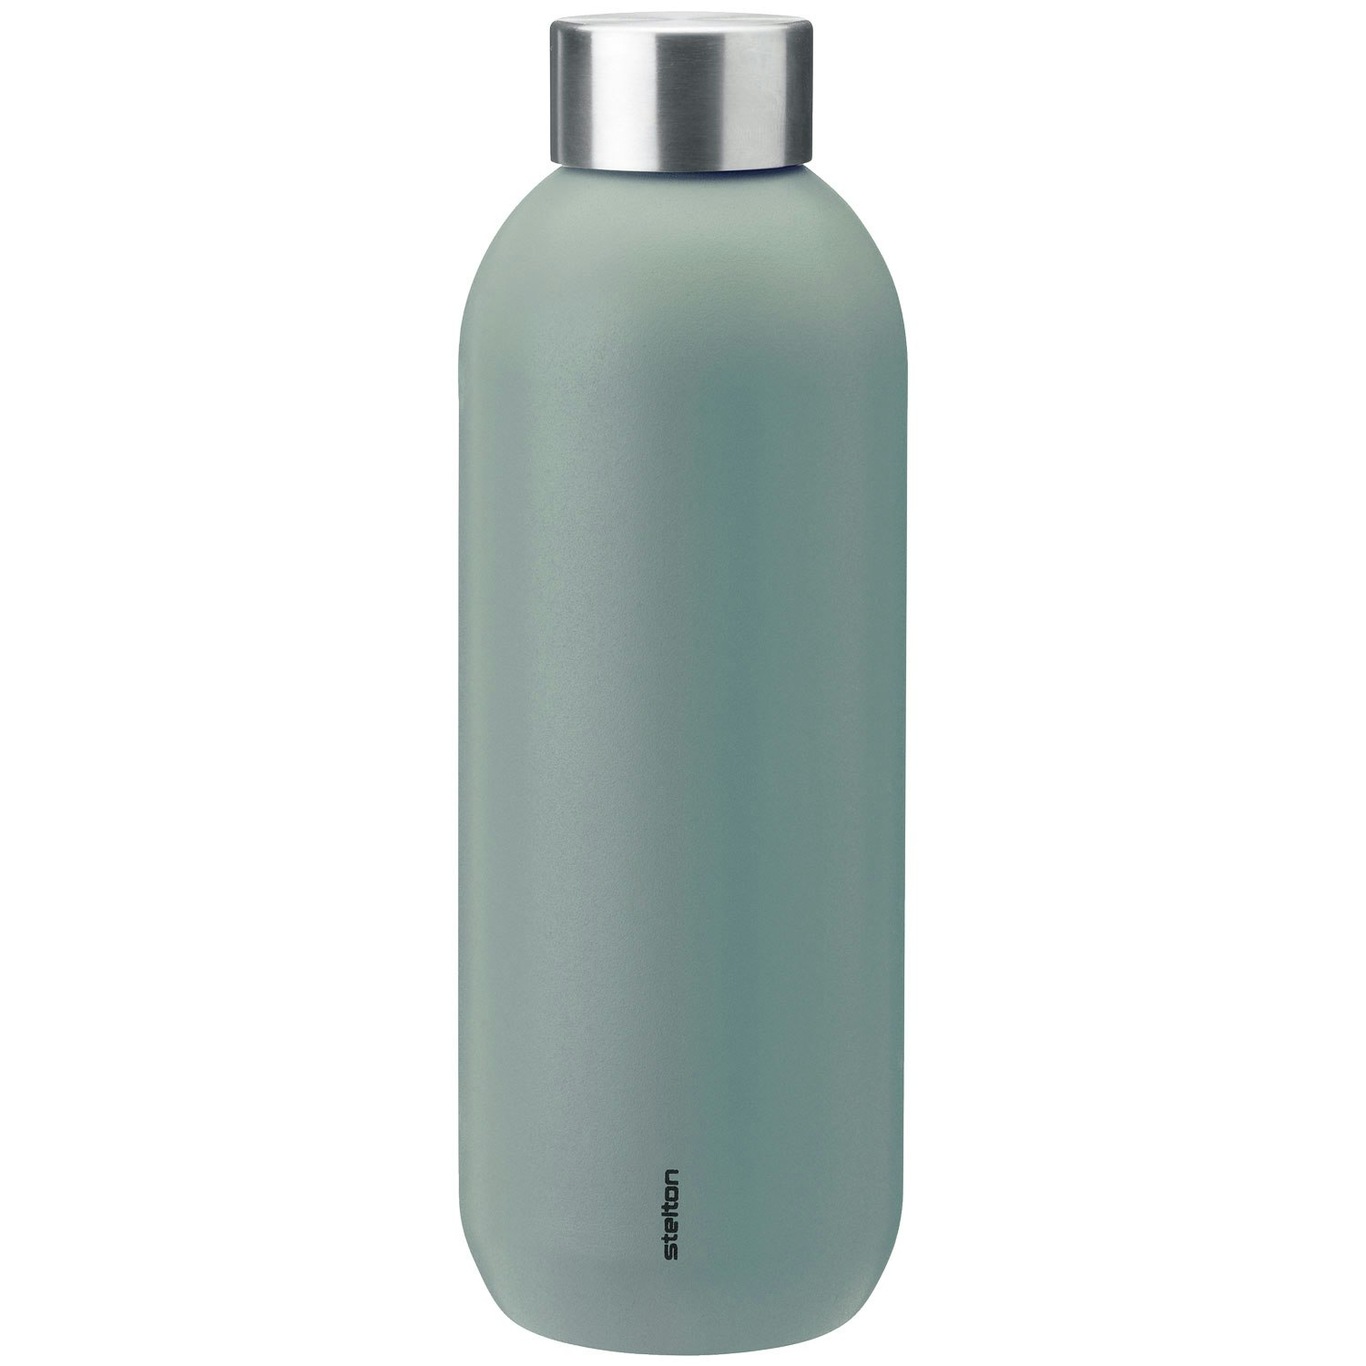 Keep Cool Thermosflasche 0,6 L, Dusty Green